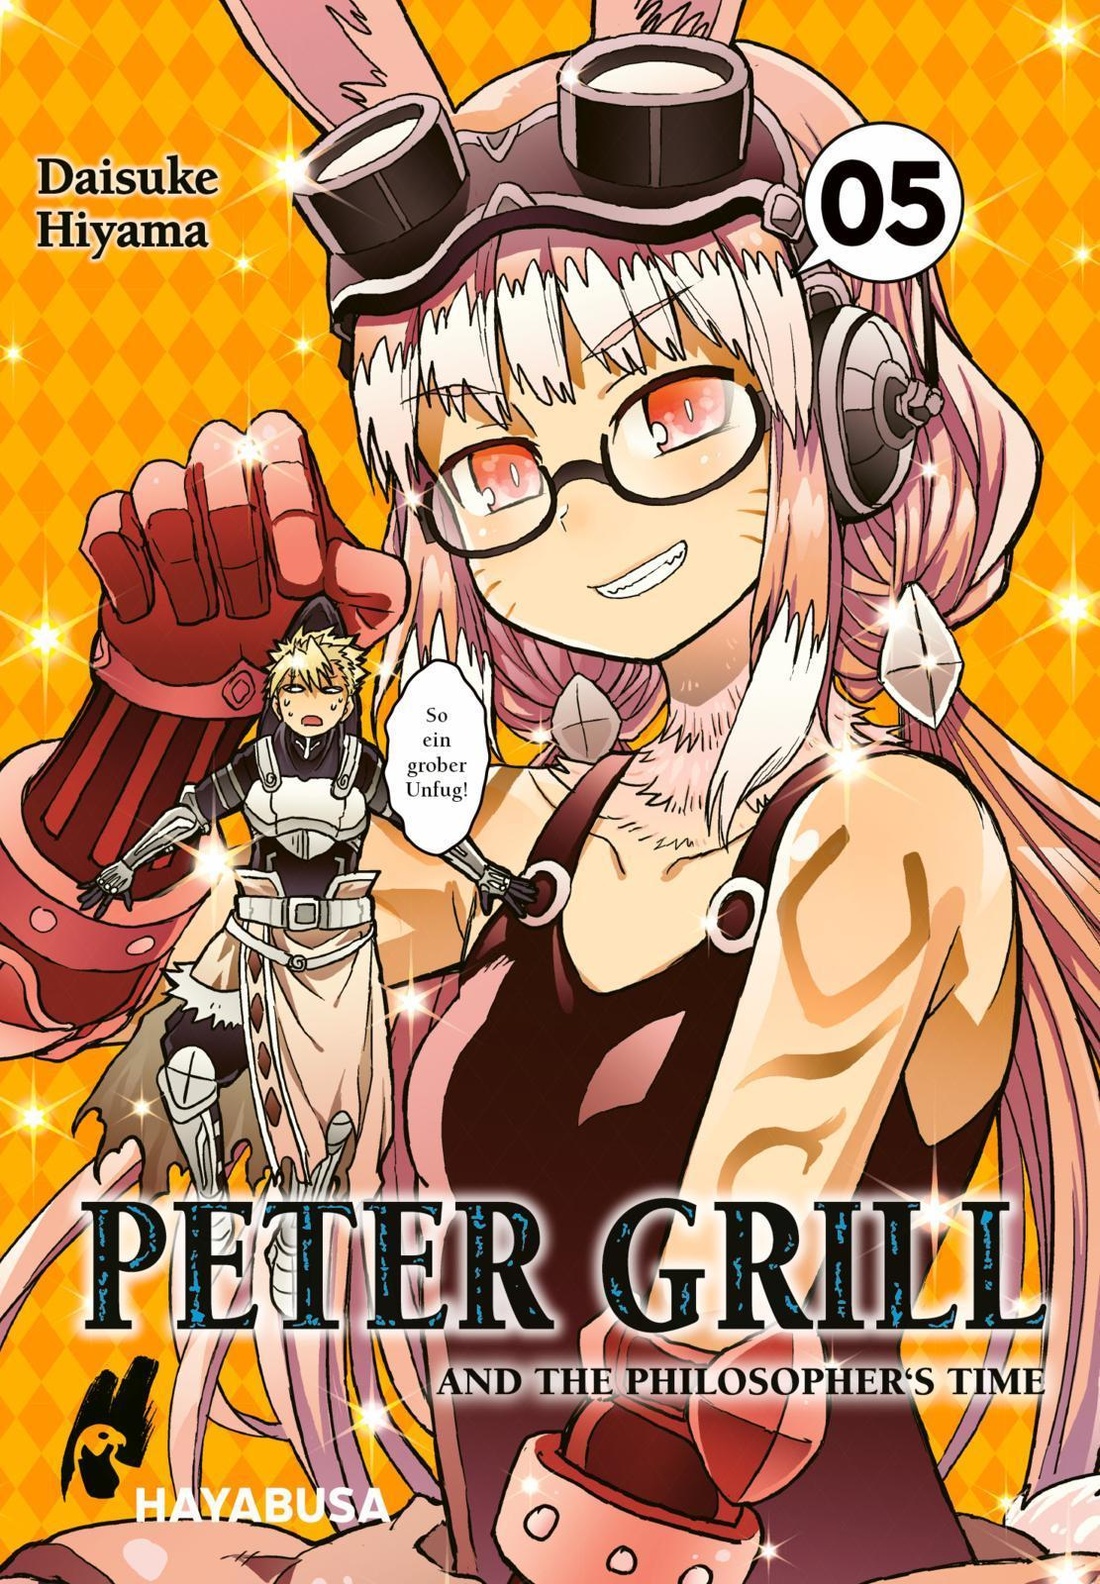 B.D. on X: Peter Grill to Kenja no Jikan / Peter Grill and the